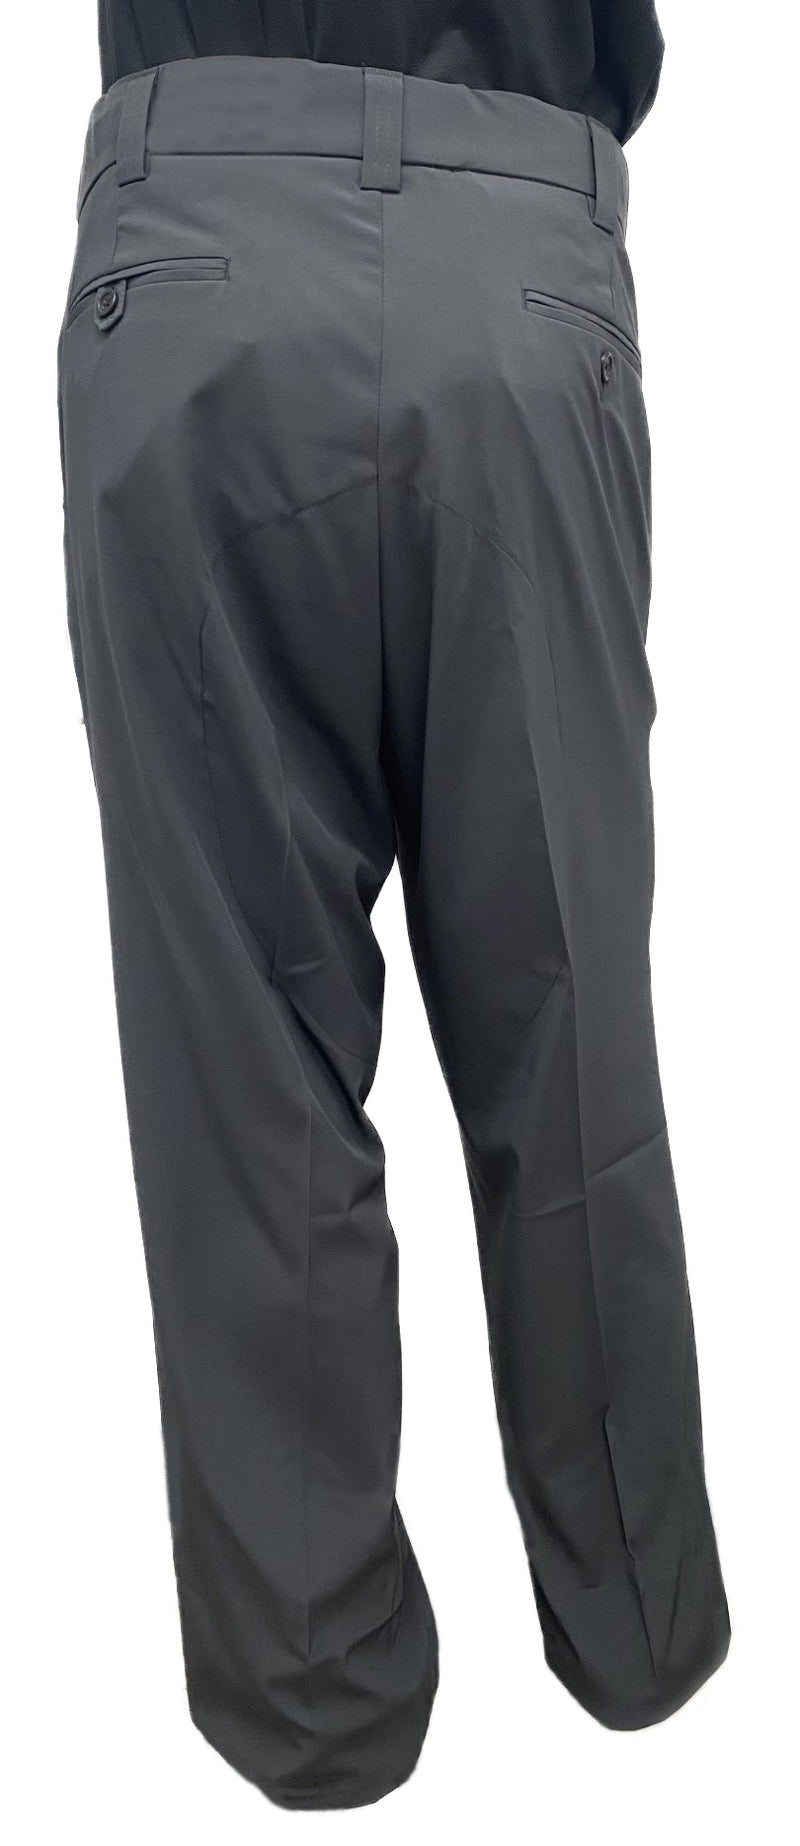 Honig's "New" Performance 4-Way Stretch Flat Front Plate Pant With Expander Waistband - Dark Charcoal